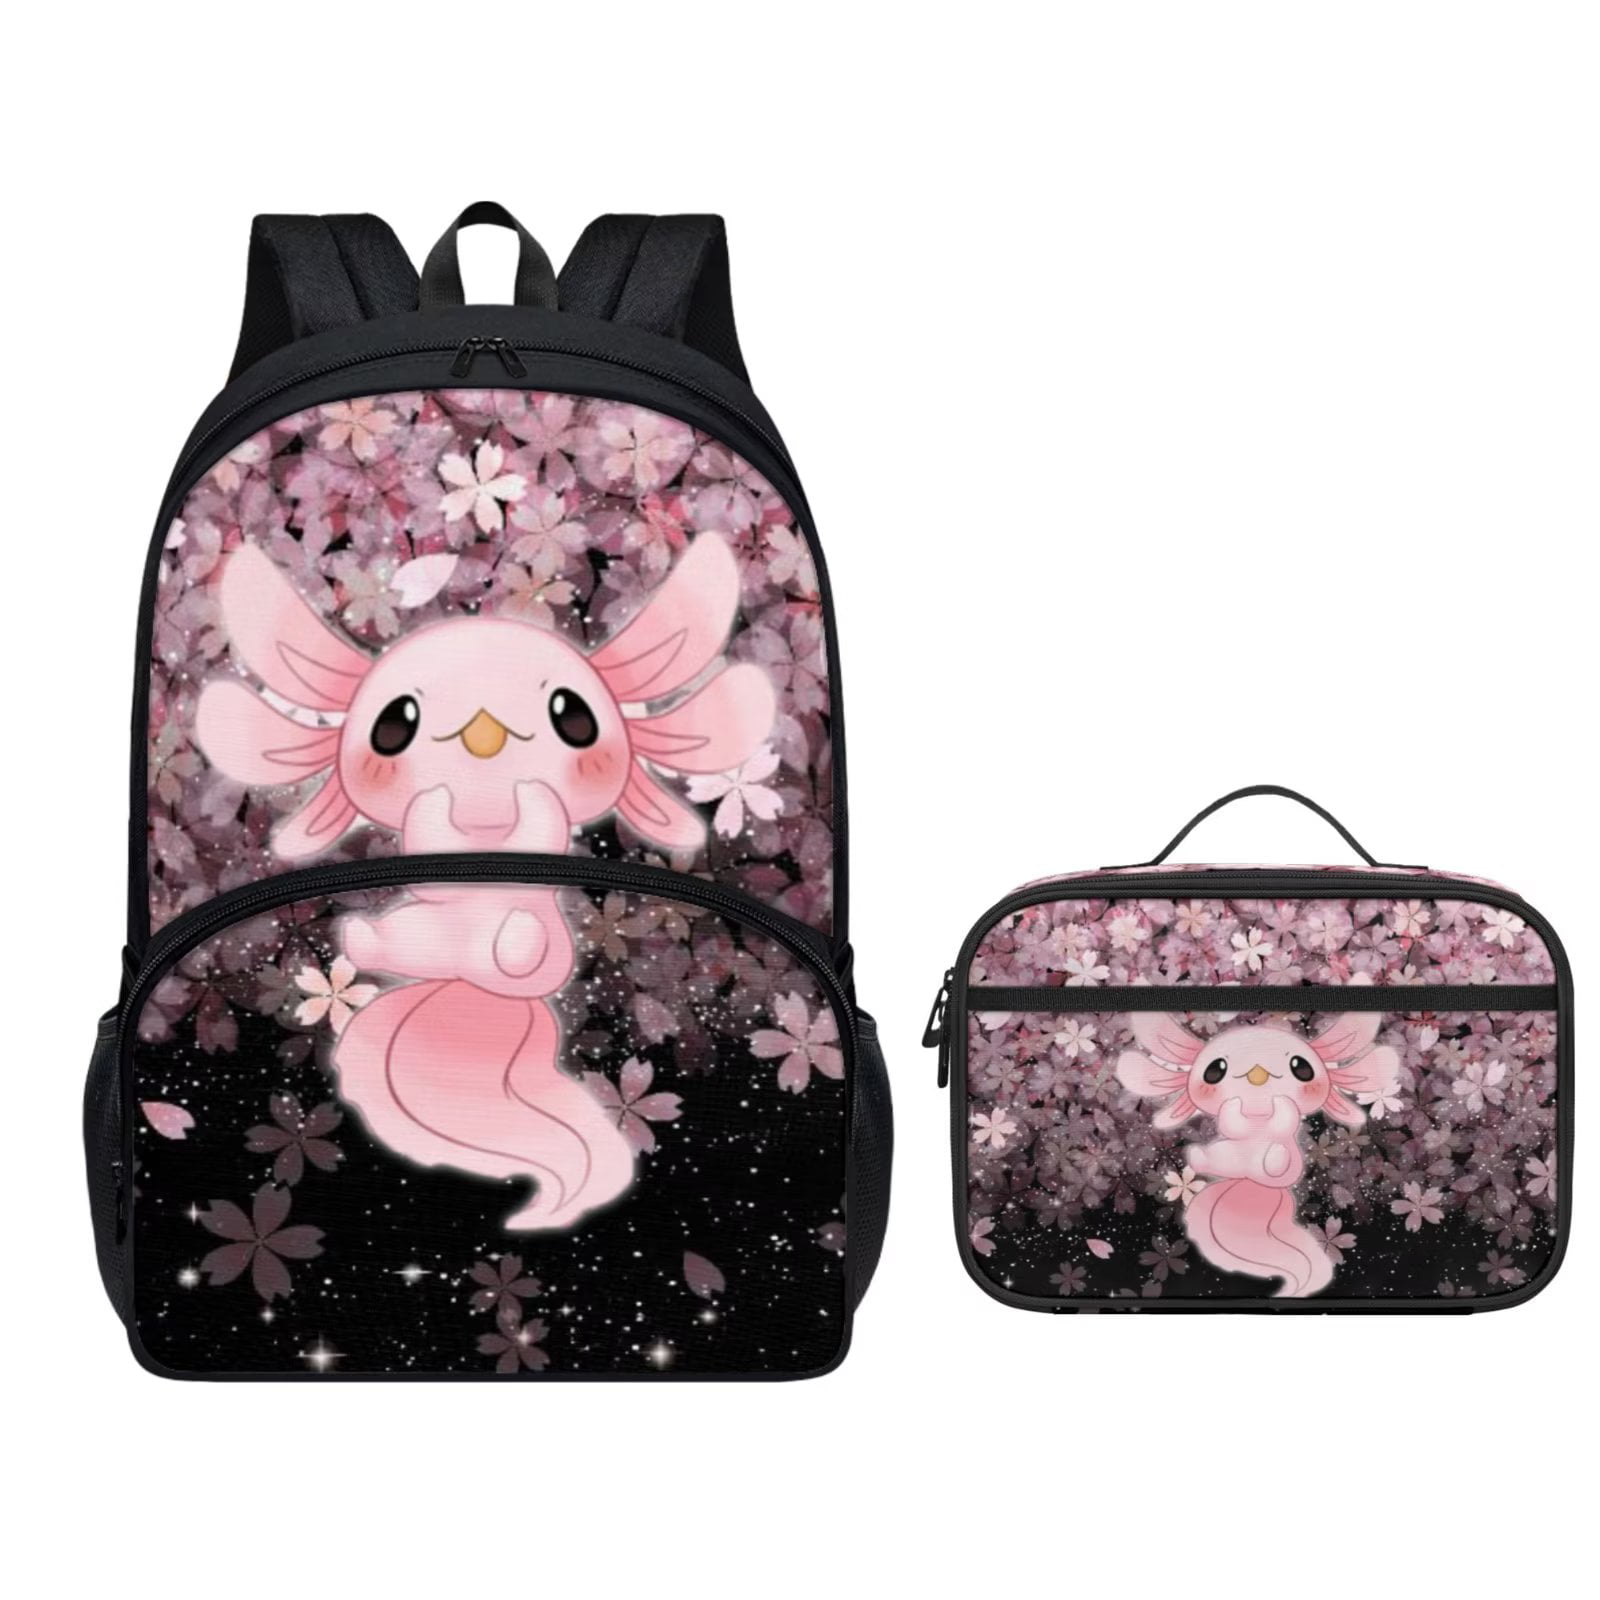  Personalized Axolotl Backpack with Lunch Box Set for Girls,  Boys - 3 in 1 Primary Middle School Backpacks Matching Combo - Large  Capacity, Durable, Lightweight, Pink Bookbag and Pencil Case Bundle 